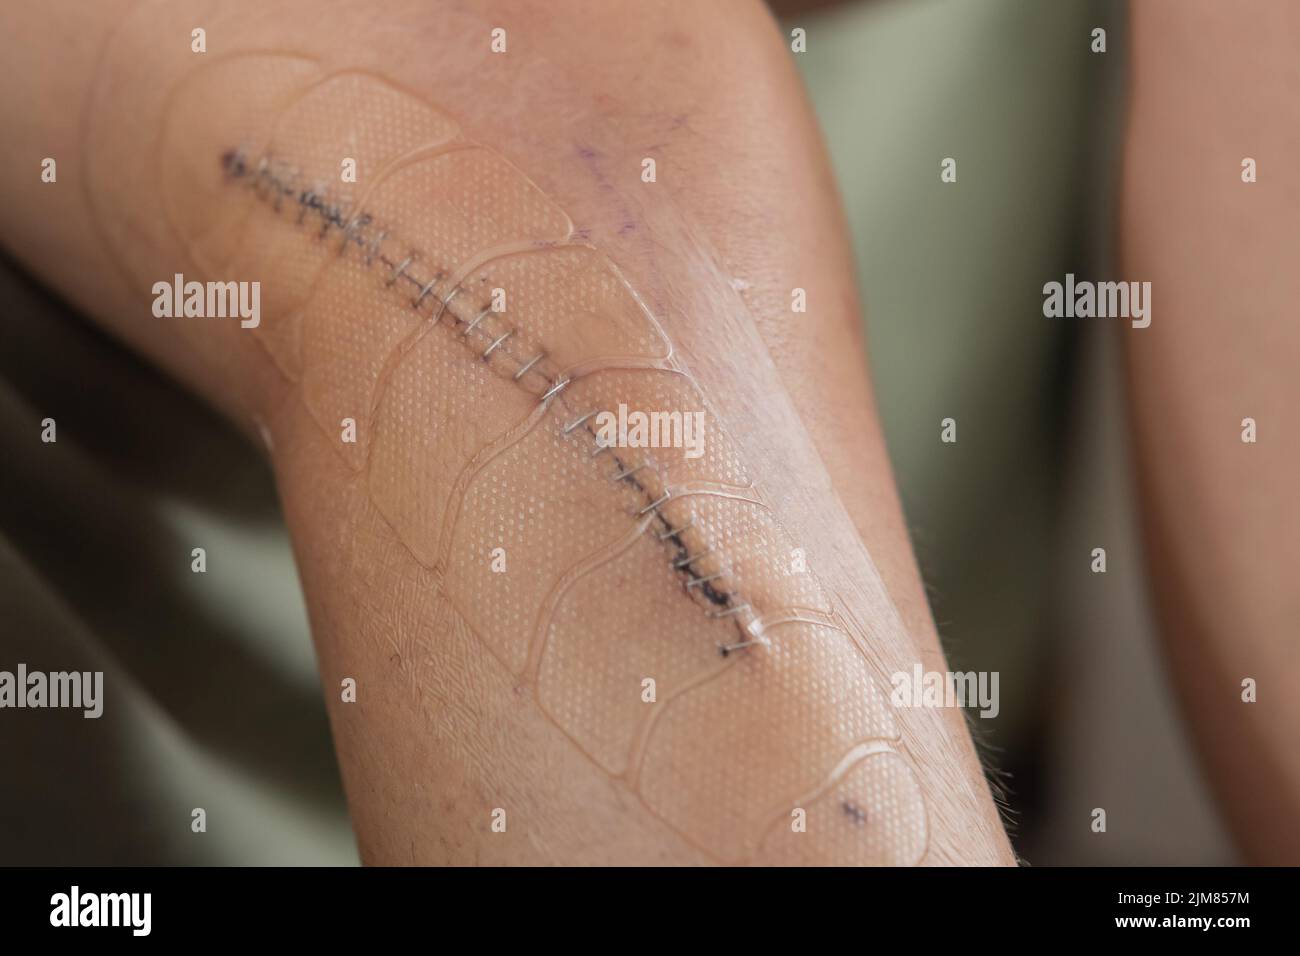 Metal staples or stitches over a fresh wound after knee surgery. Wound and stitches covered with plastic self adhesive safety cover to prevent bruises Stock Photo